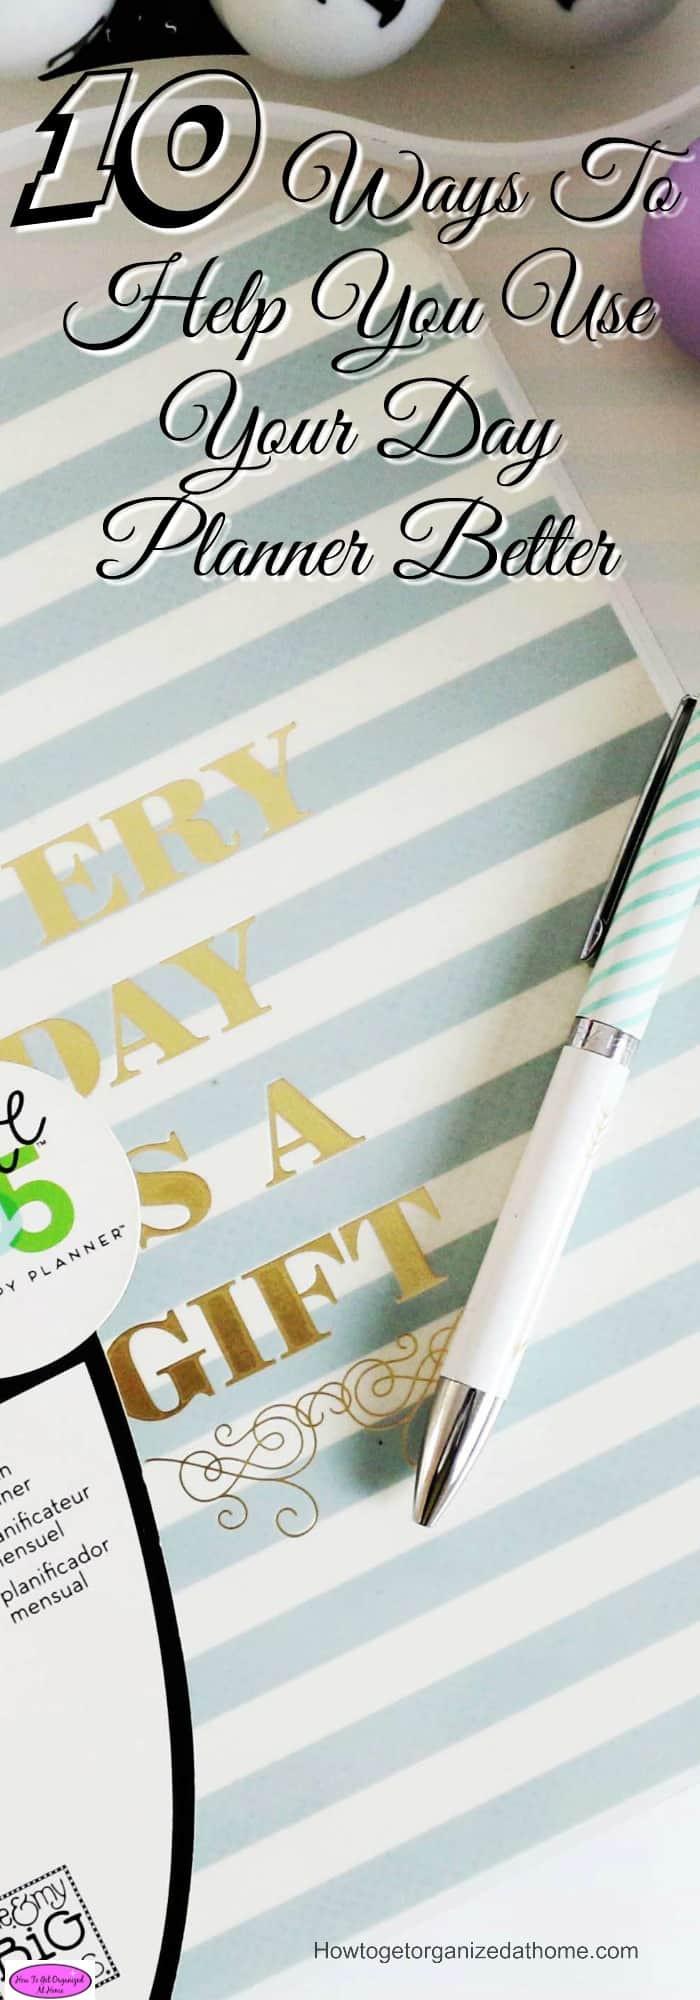 How you use your day planner is important, it will help you organize your life! Here are 10 tips to make the most of your day planner.